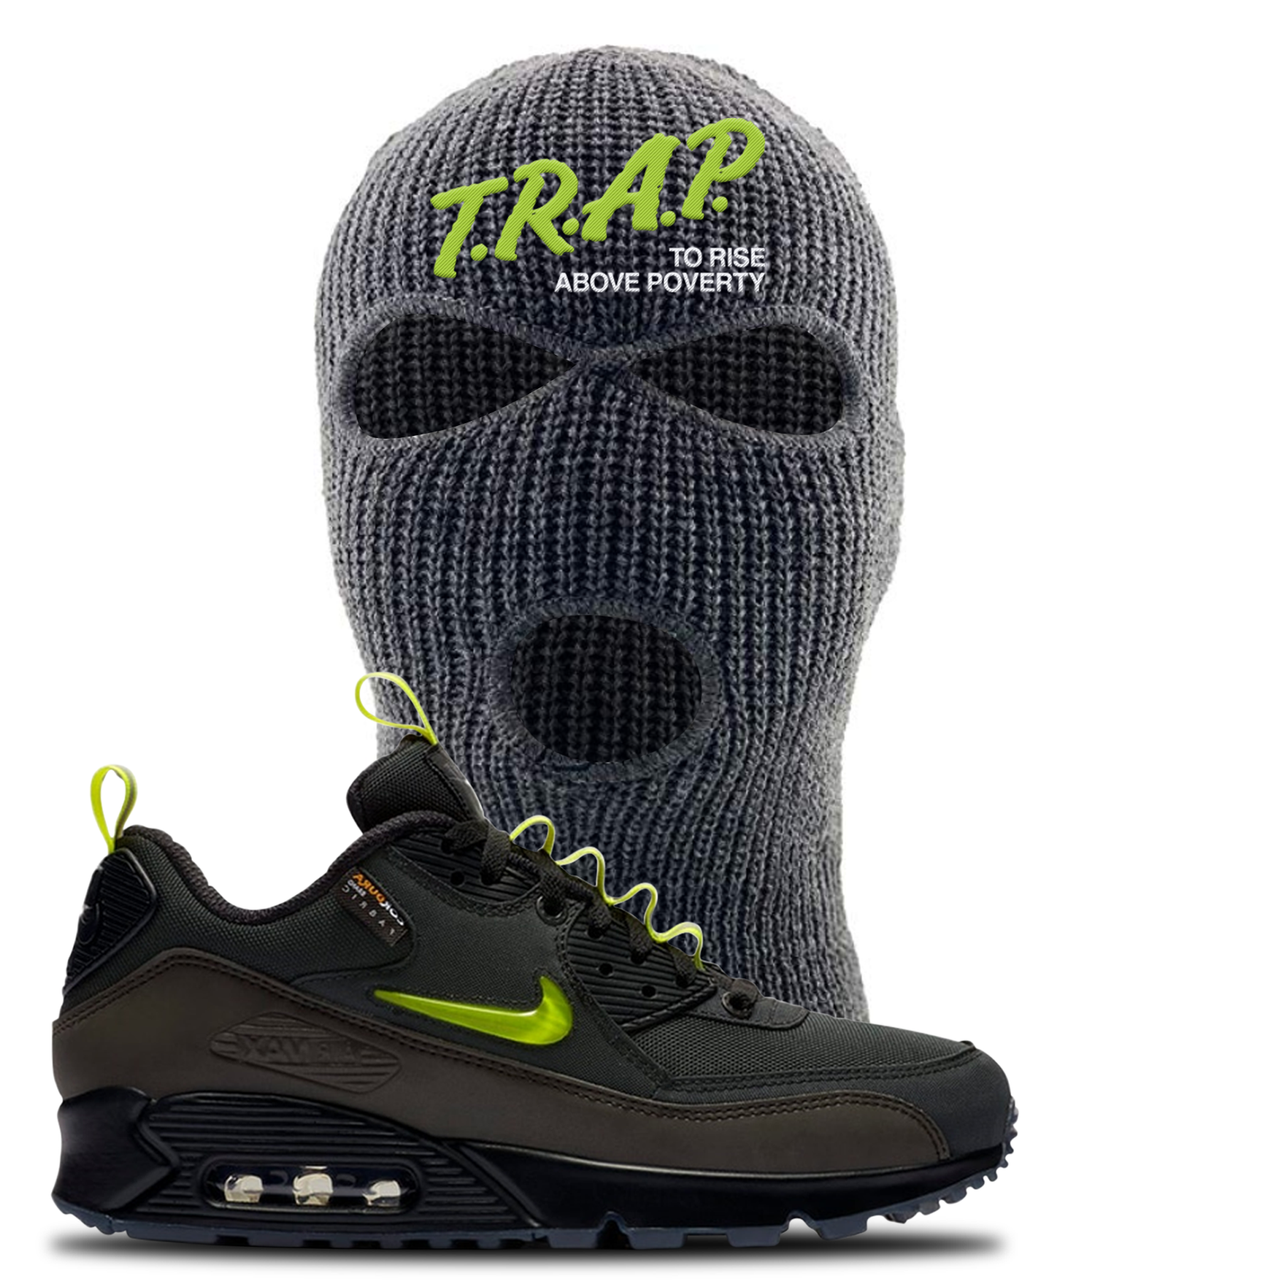 The Basement X Air Max 90 Manchester Trap to Rise Above Poverty Dark Gray Sneaker Hook Up Ski Mask